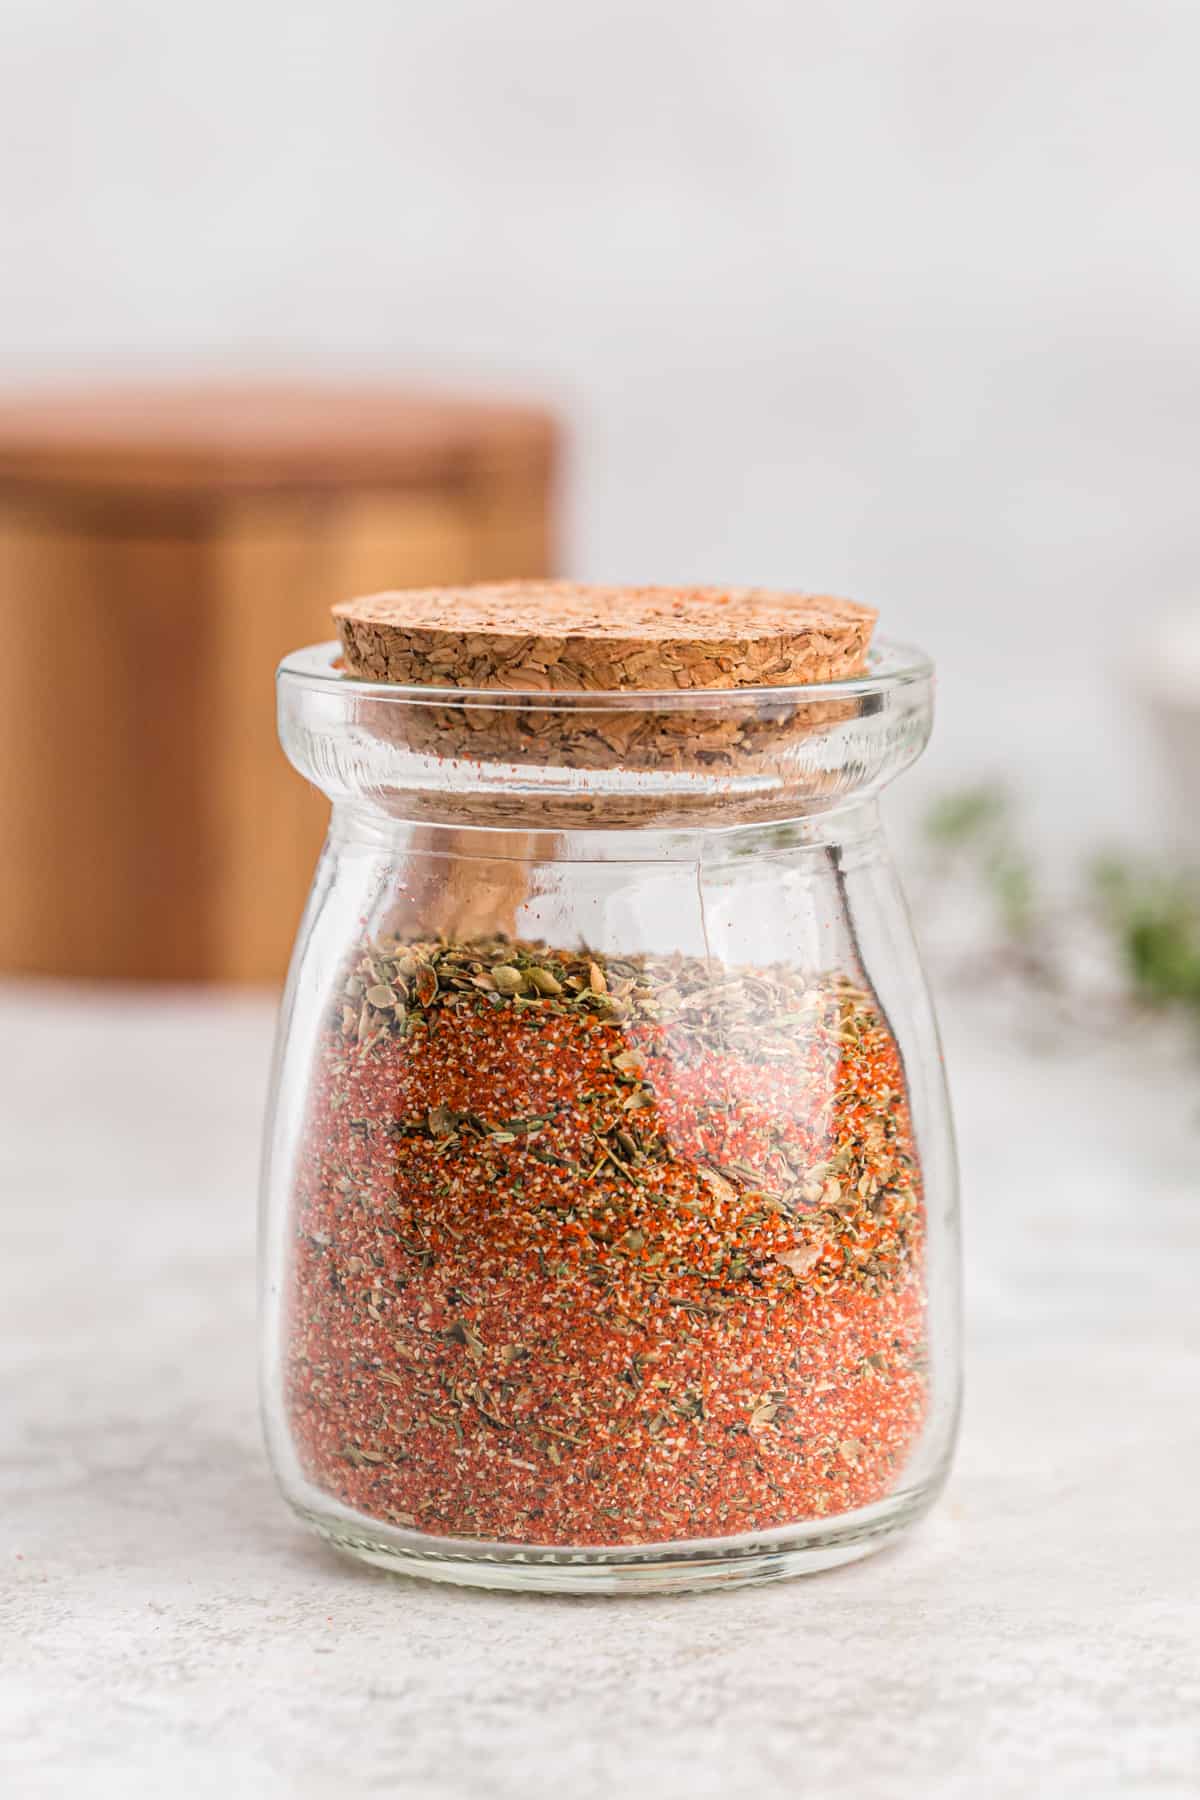 A small jar filled with blackened seasoning and topped with a cork.